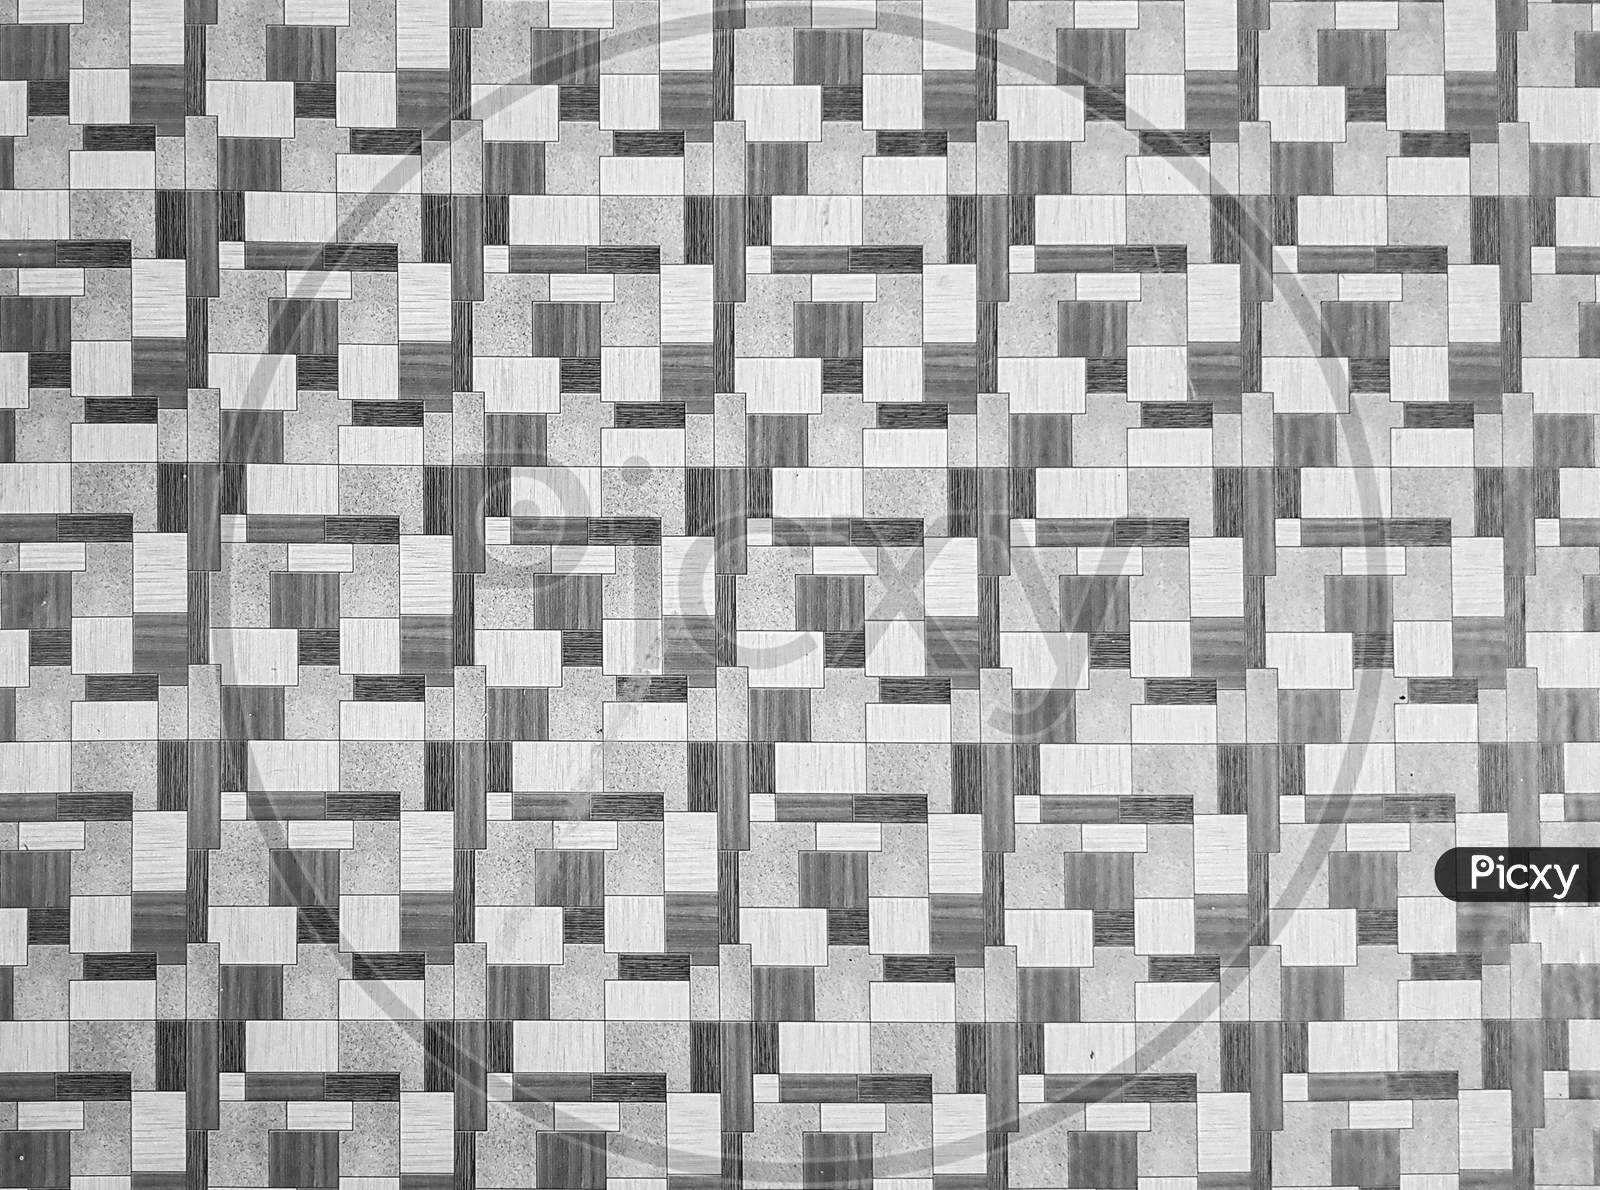 abstract tile monochrome pattern background image.